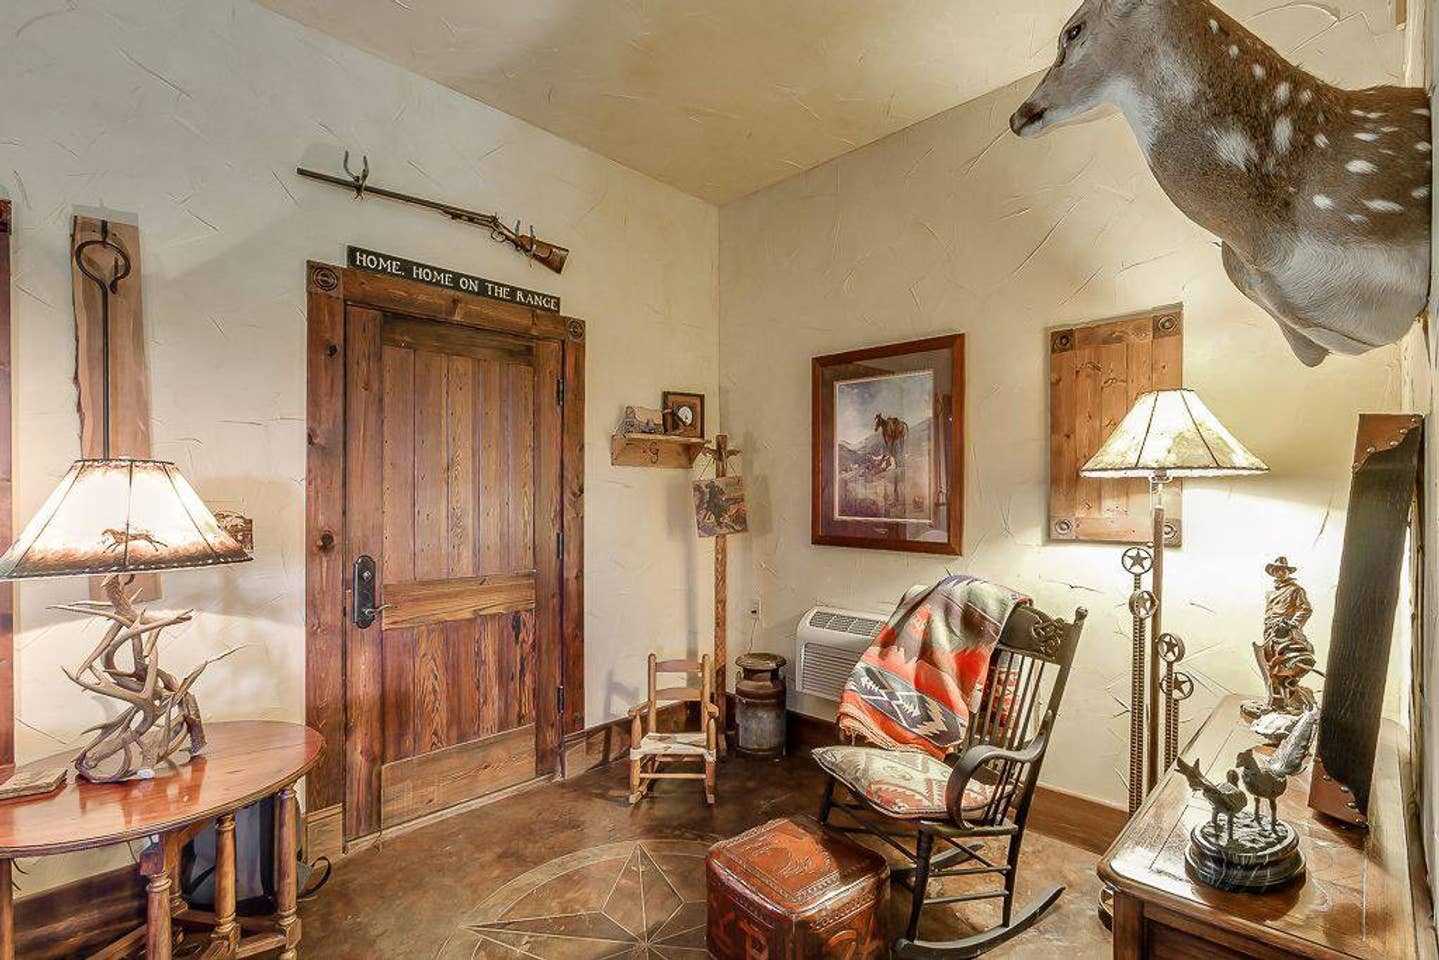                                                 Historical antiques and Lone Star State originals give the Ranch House a Hill Country personality all its own.